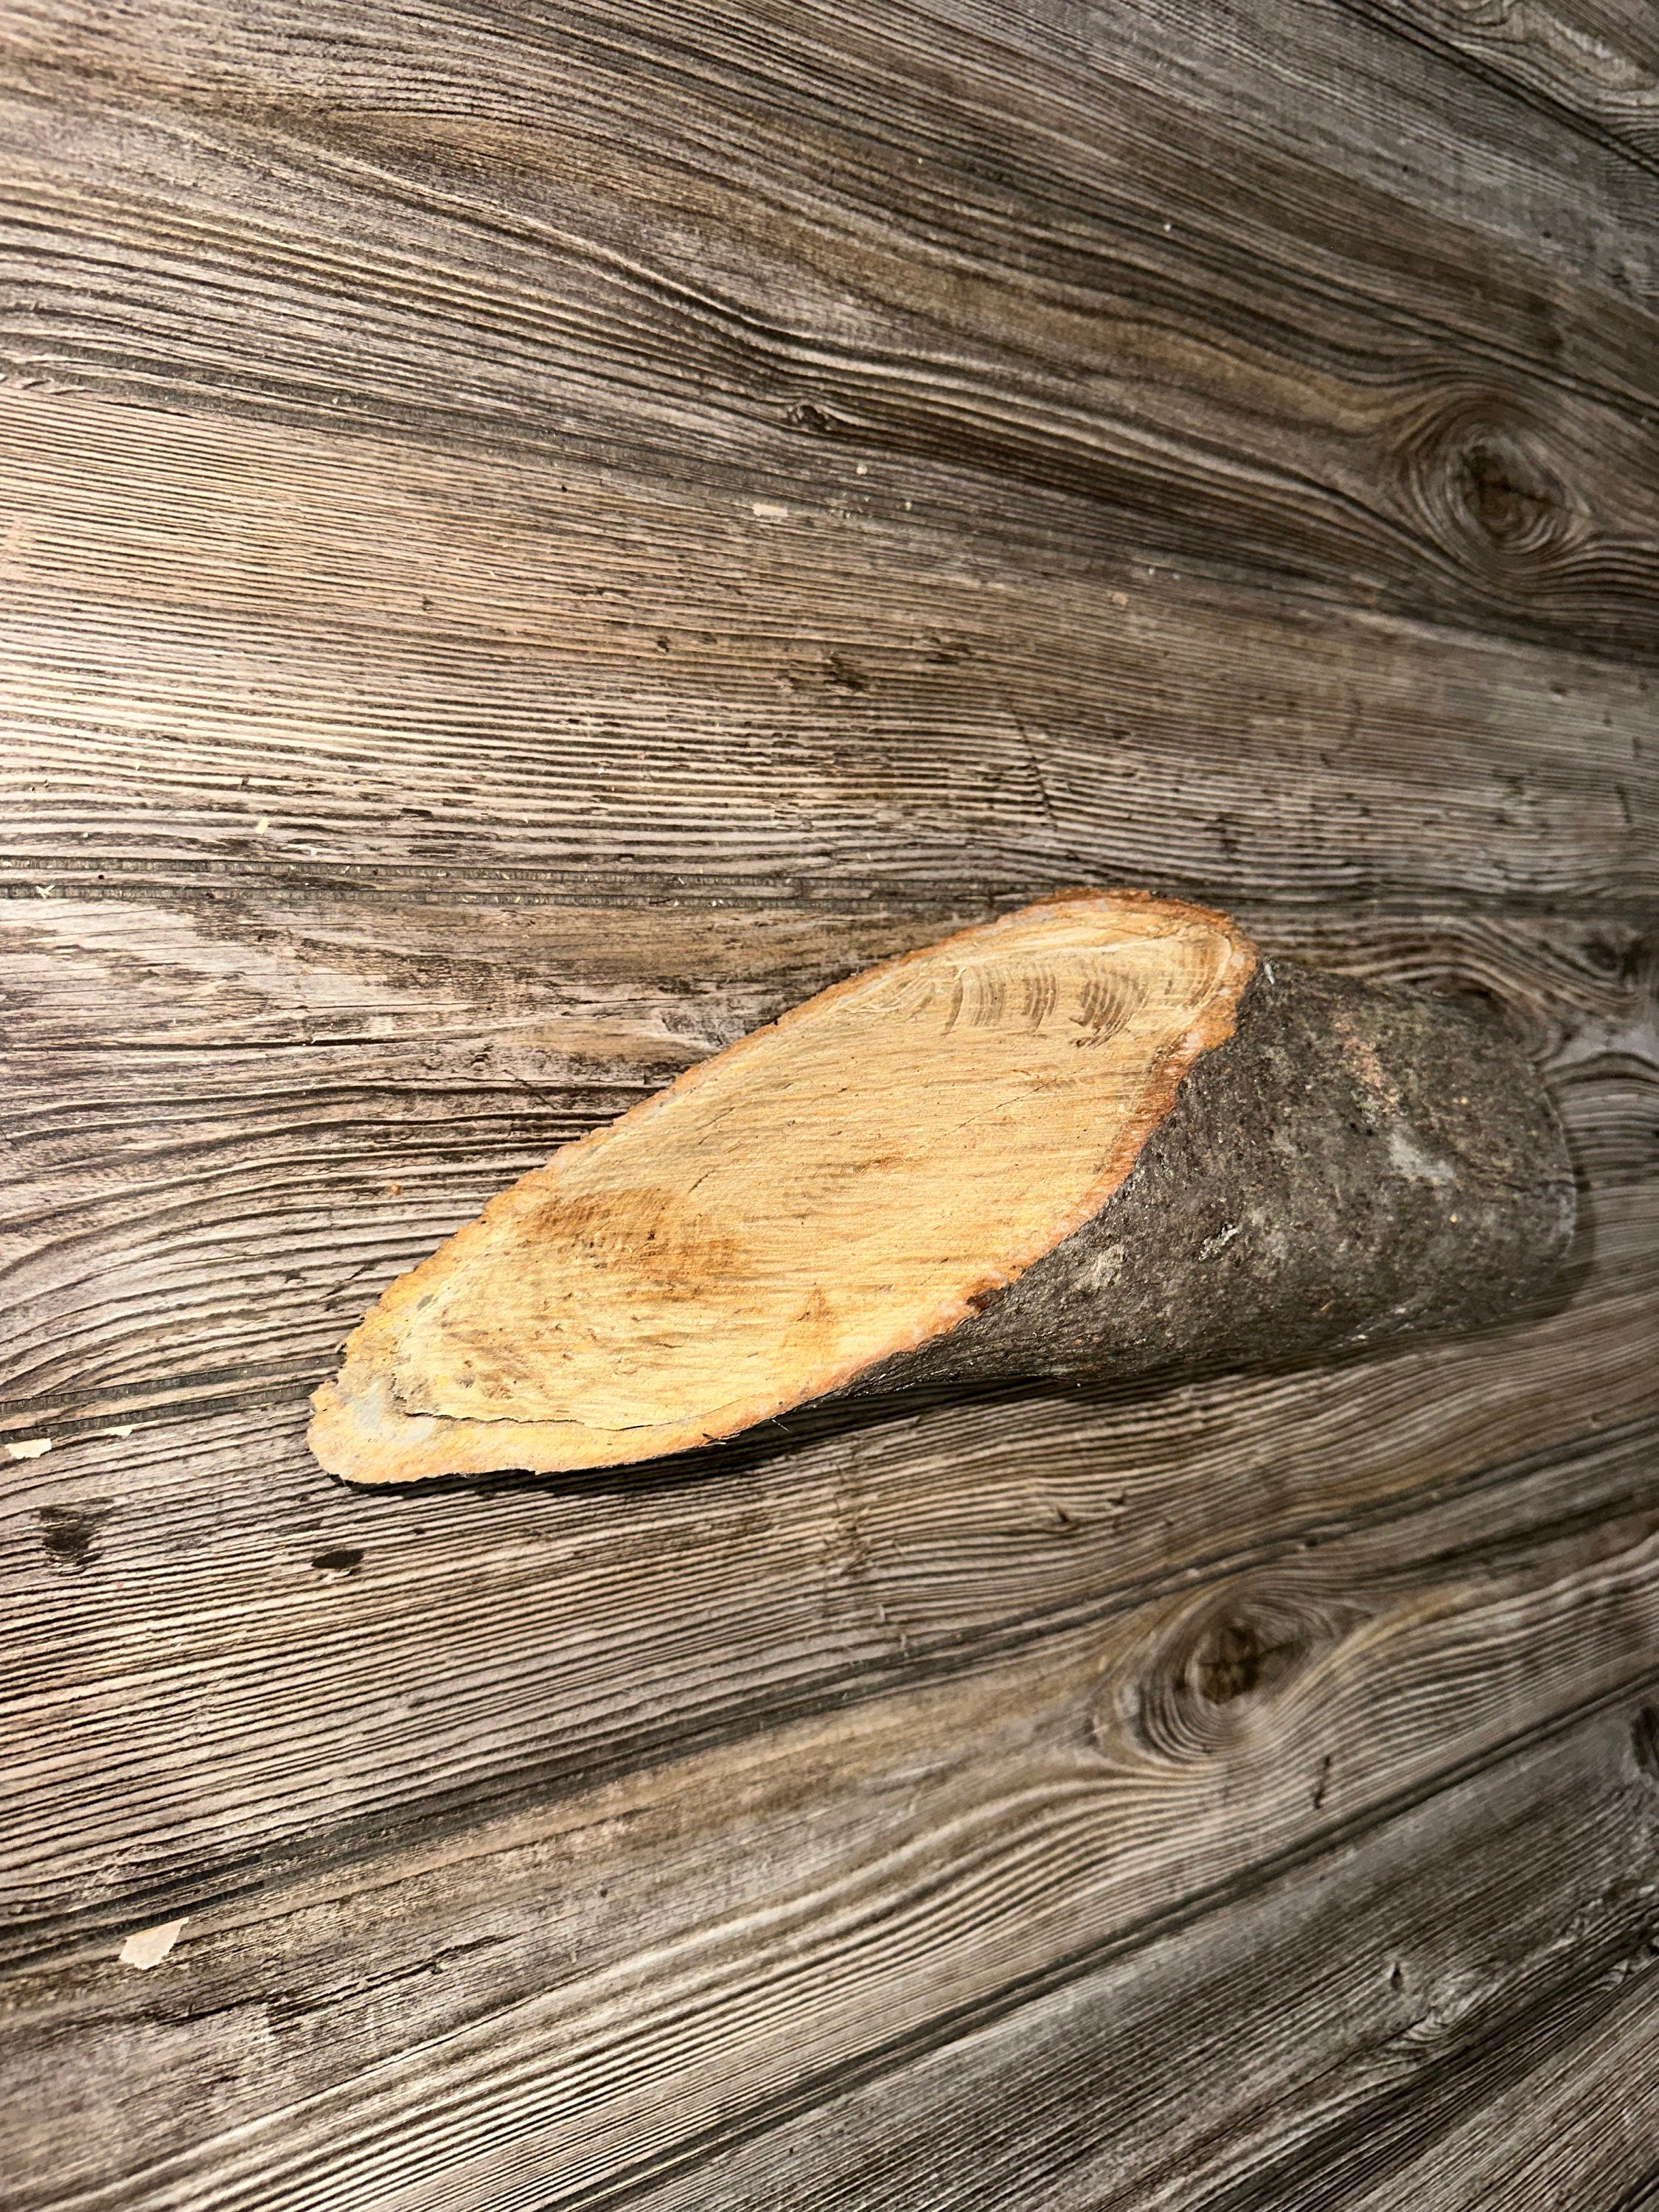 Basswood Log, Basswood Wedge, One Count, About 12 Inches Long by 4 Inches Wide and 3.5 Inches Tall